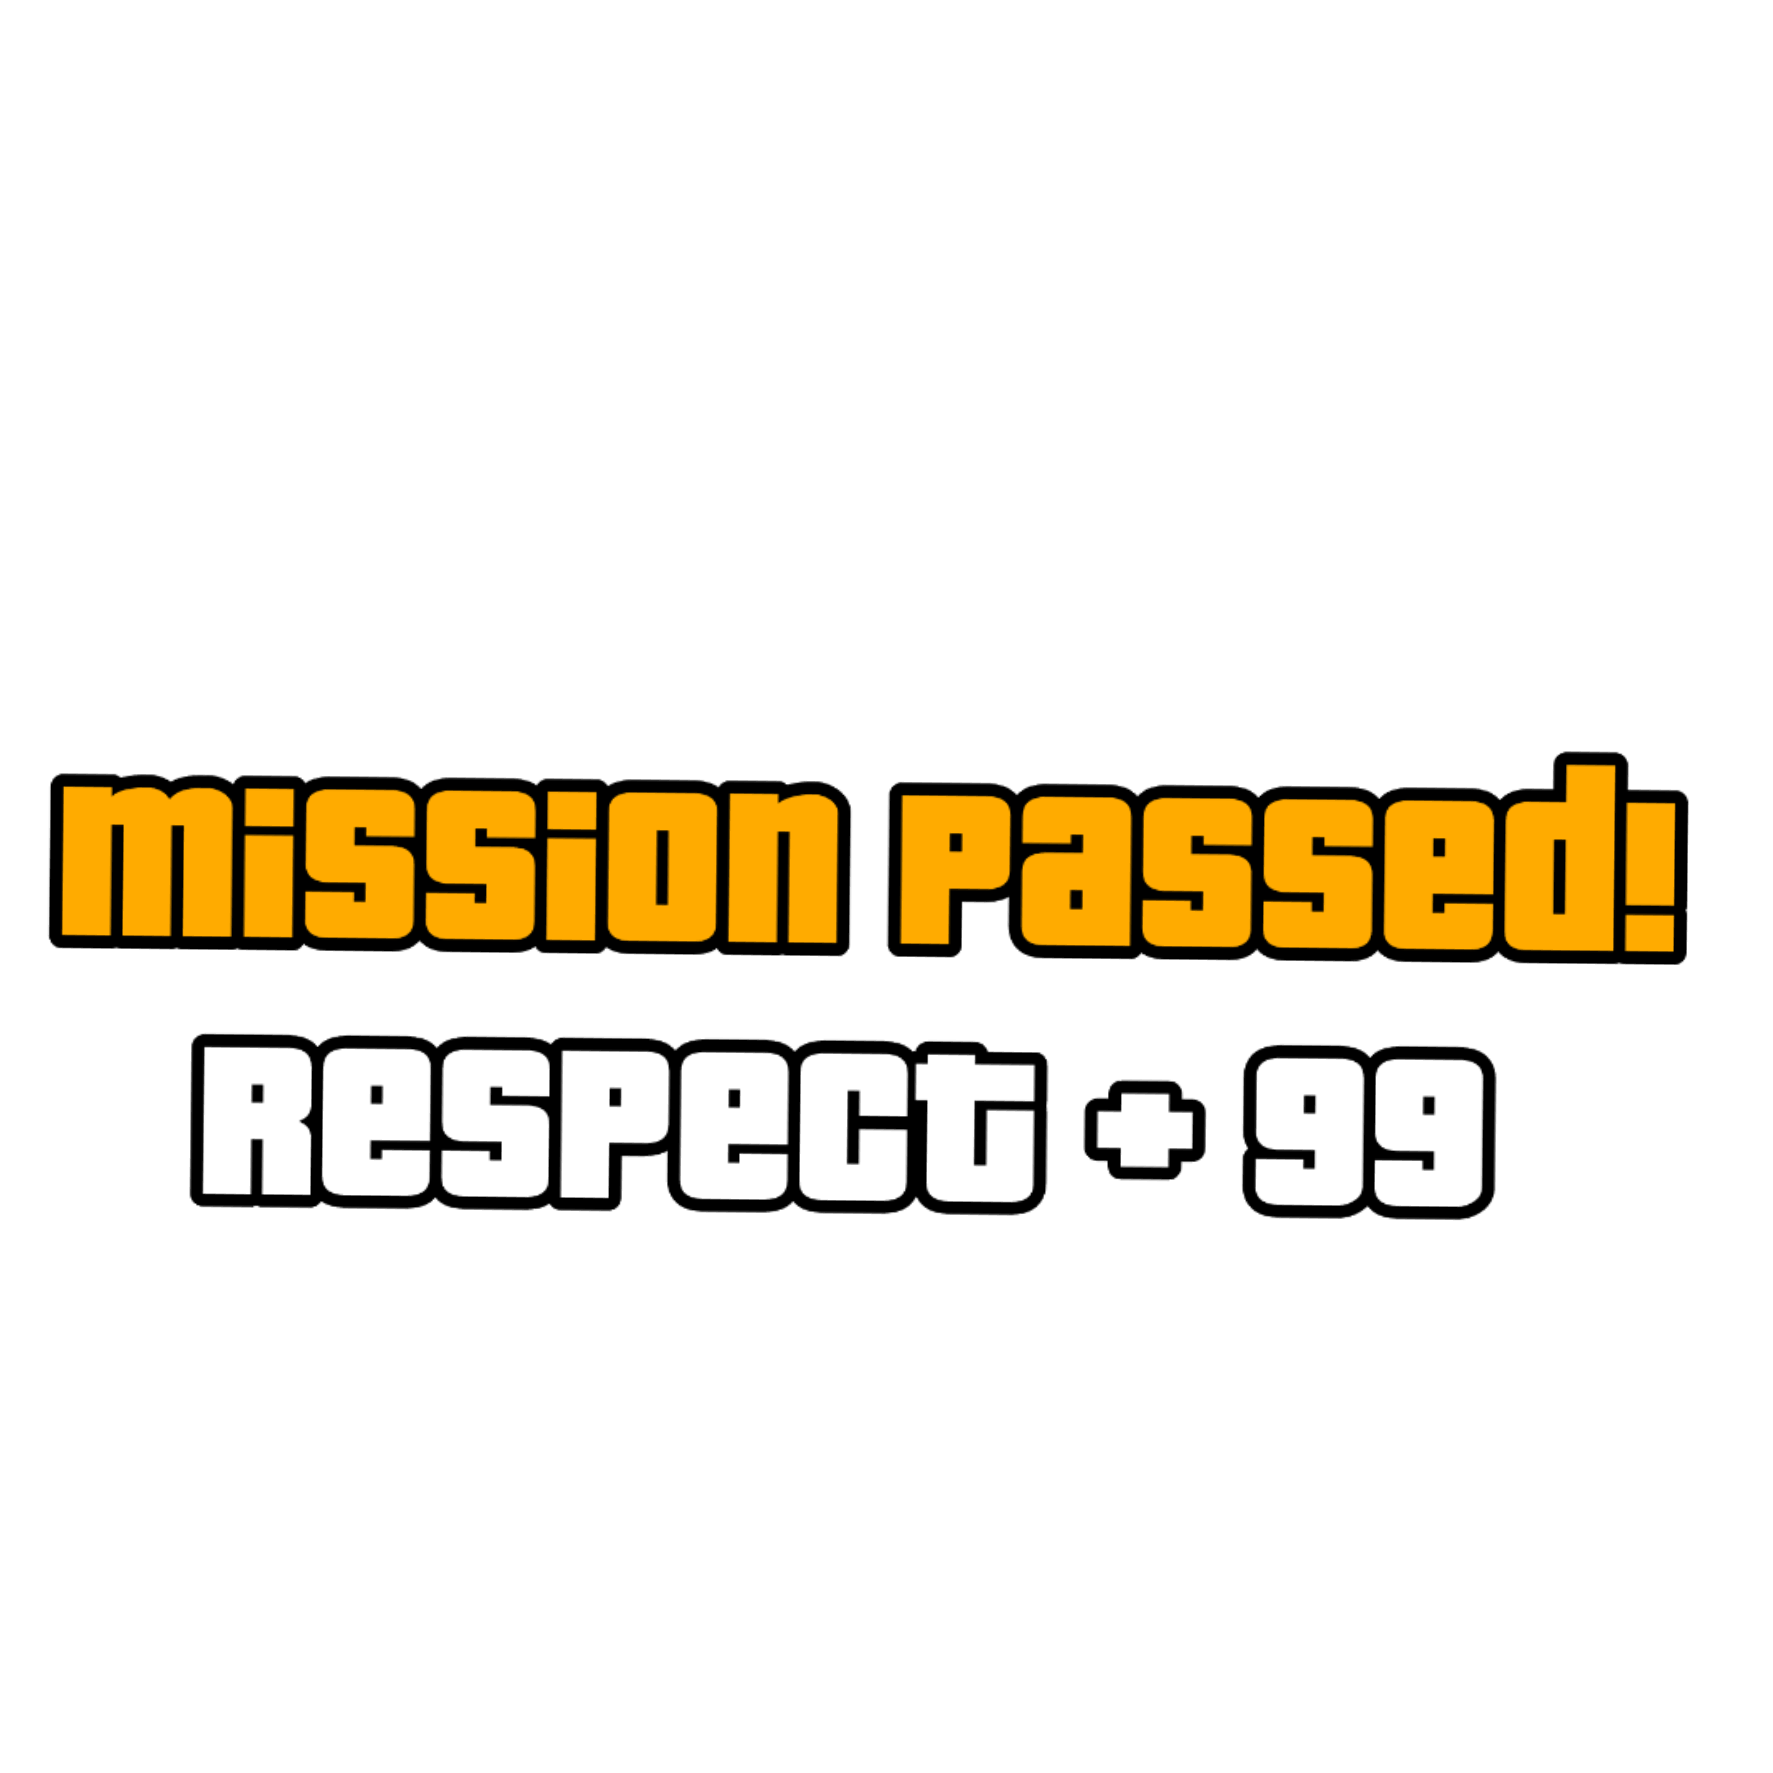 Mission completed мем. ГТА Сан андреас Mission complete. GTA Mission Passed. Mission complete respect+ GTA. Mission Passed без фона.